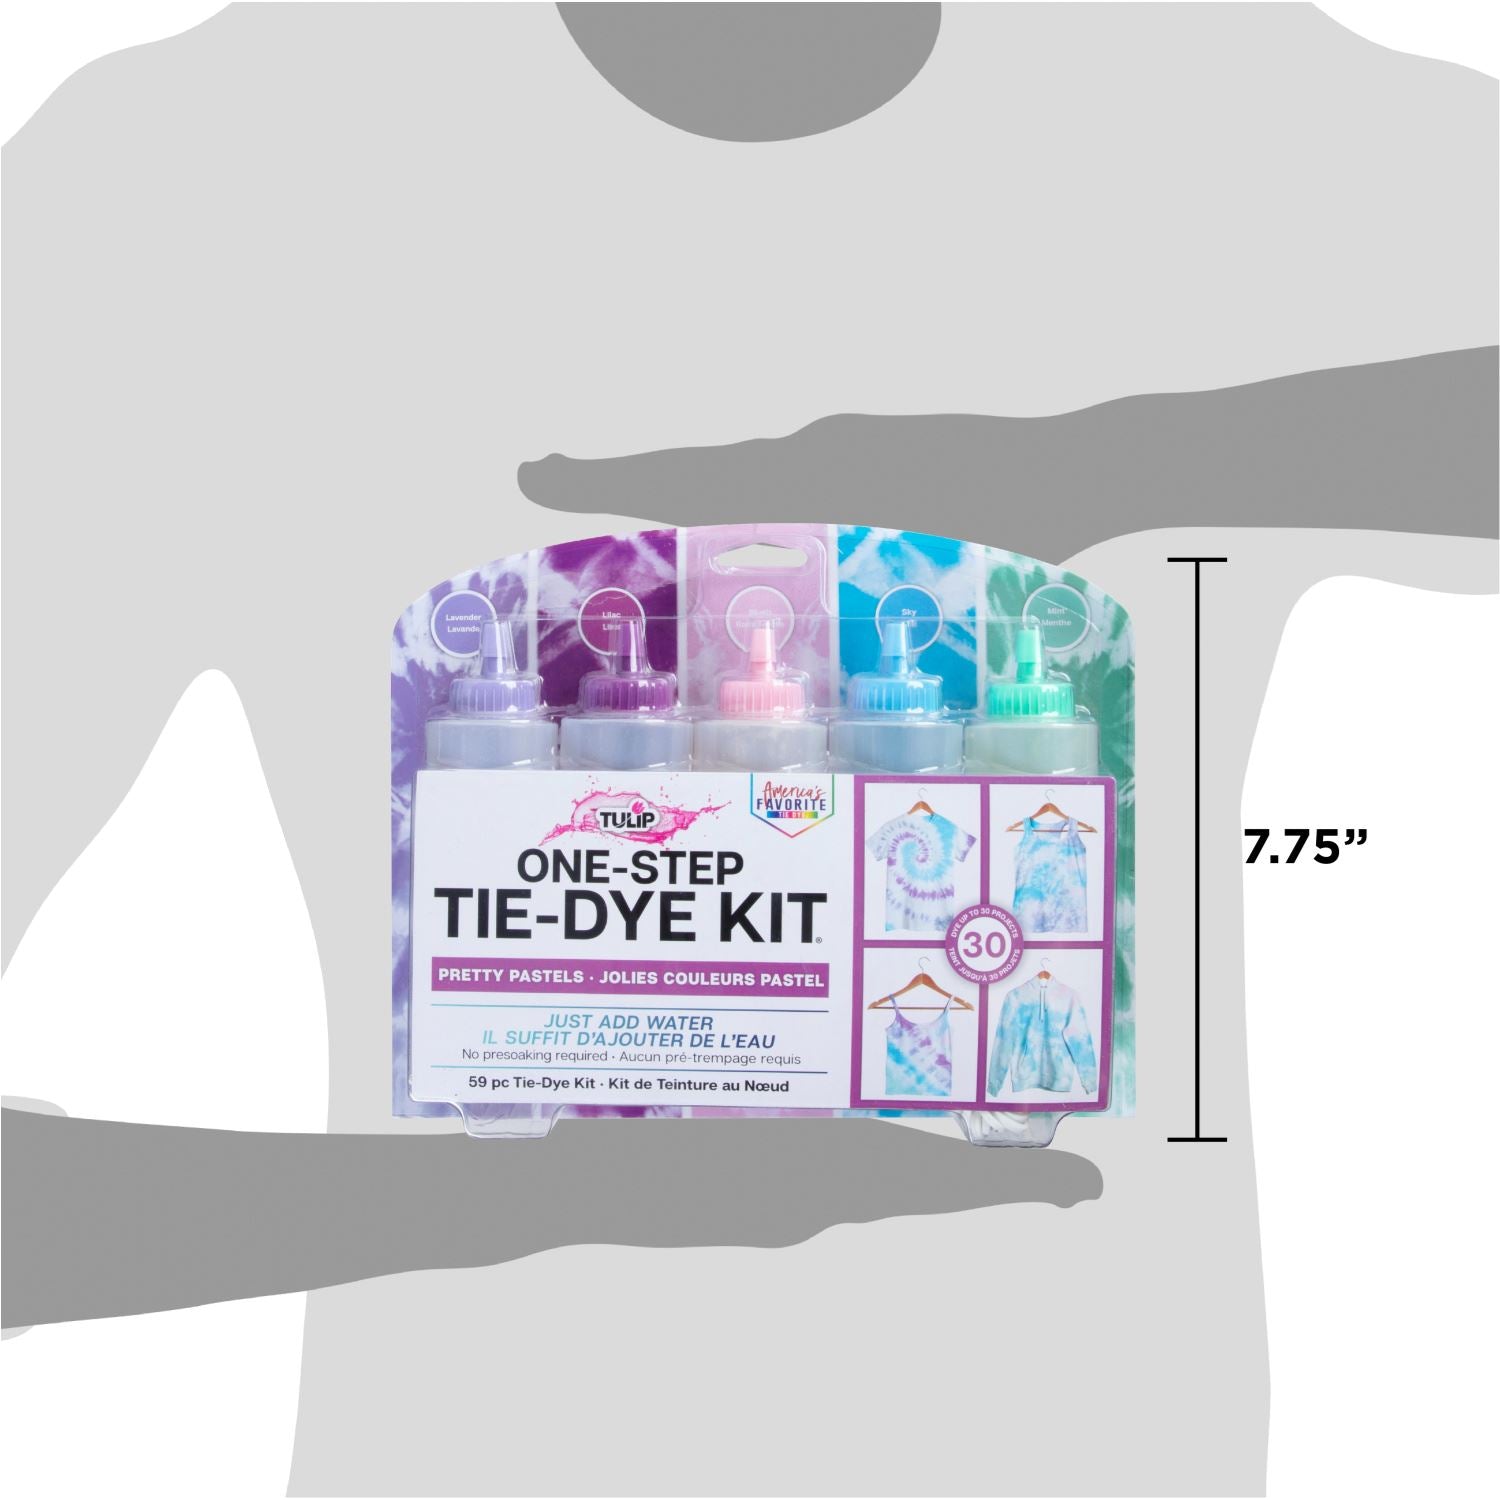 3 PACK of Neon Tie-Dye Kits - Create Up to 12 Colorful Custom Tie Dye  Creations PER KIT! $15 per kit at Walmart, but you're getting THREE kits  from us for the